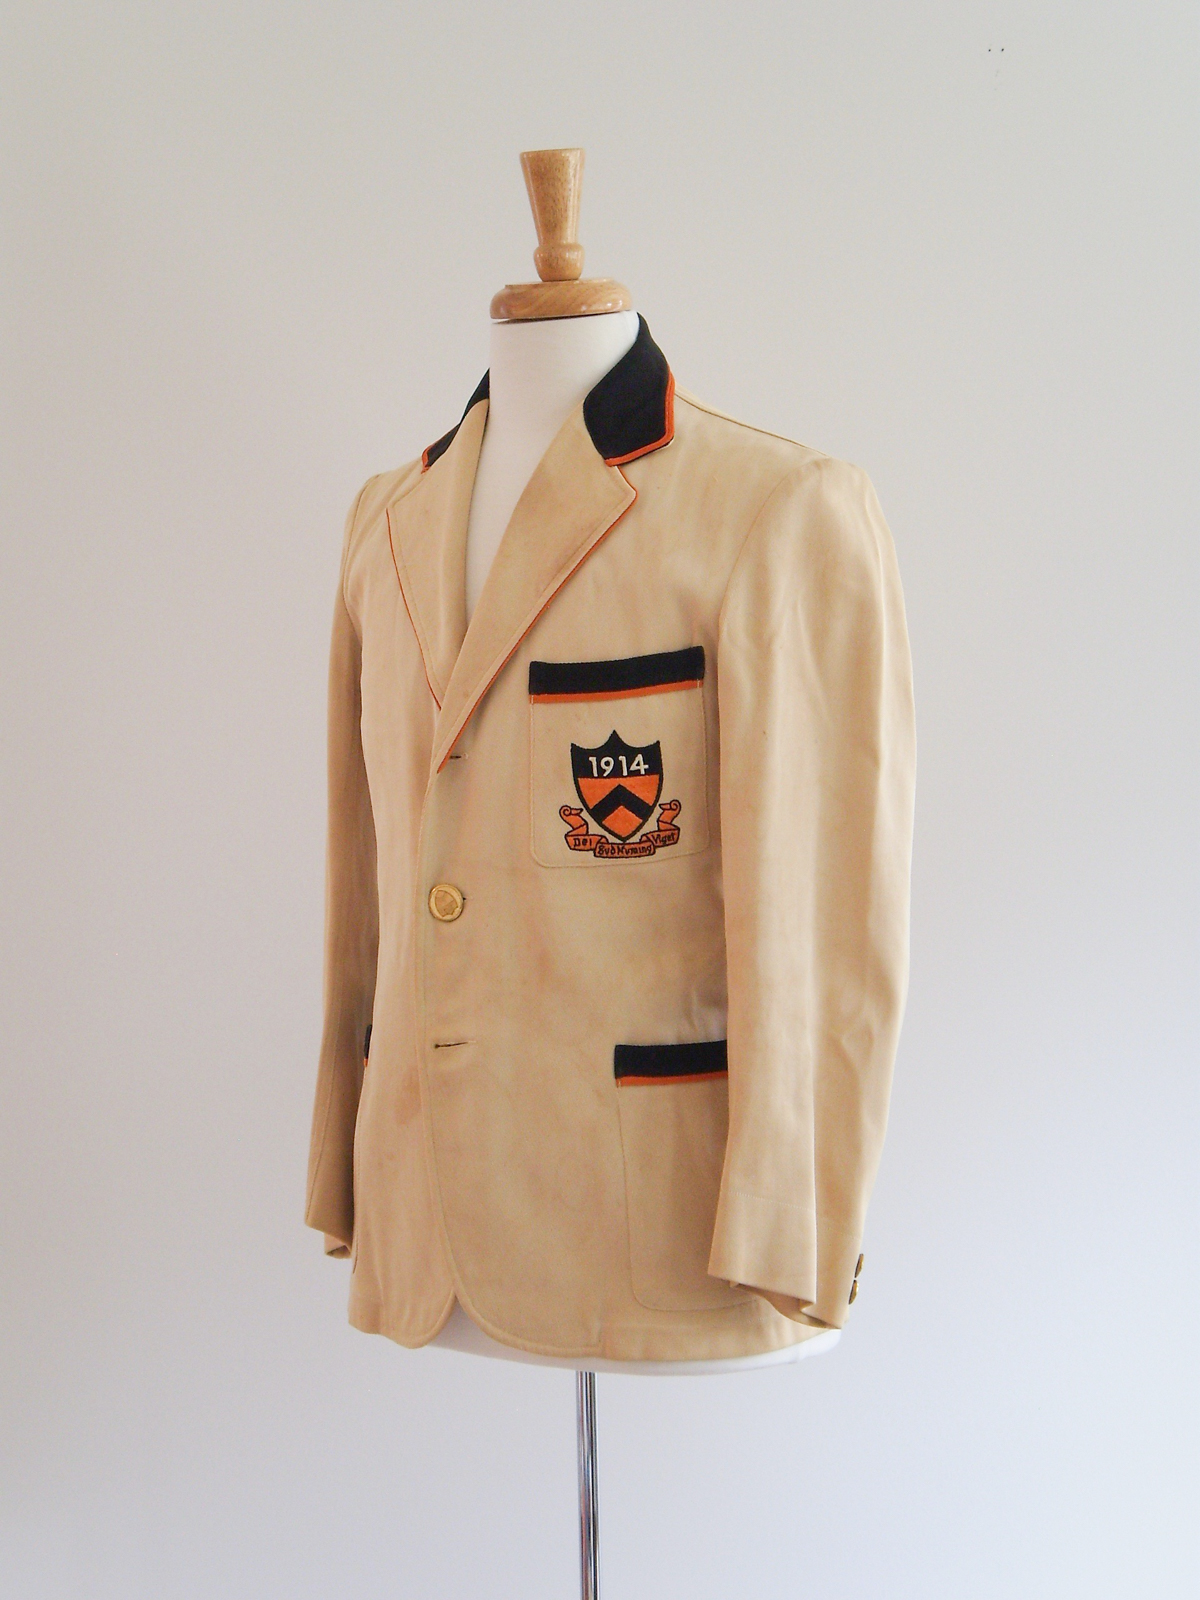 Reunions Jacket 1914 Front